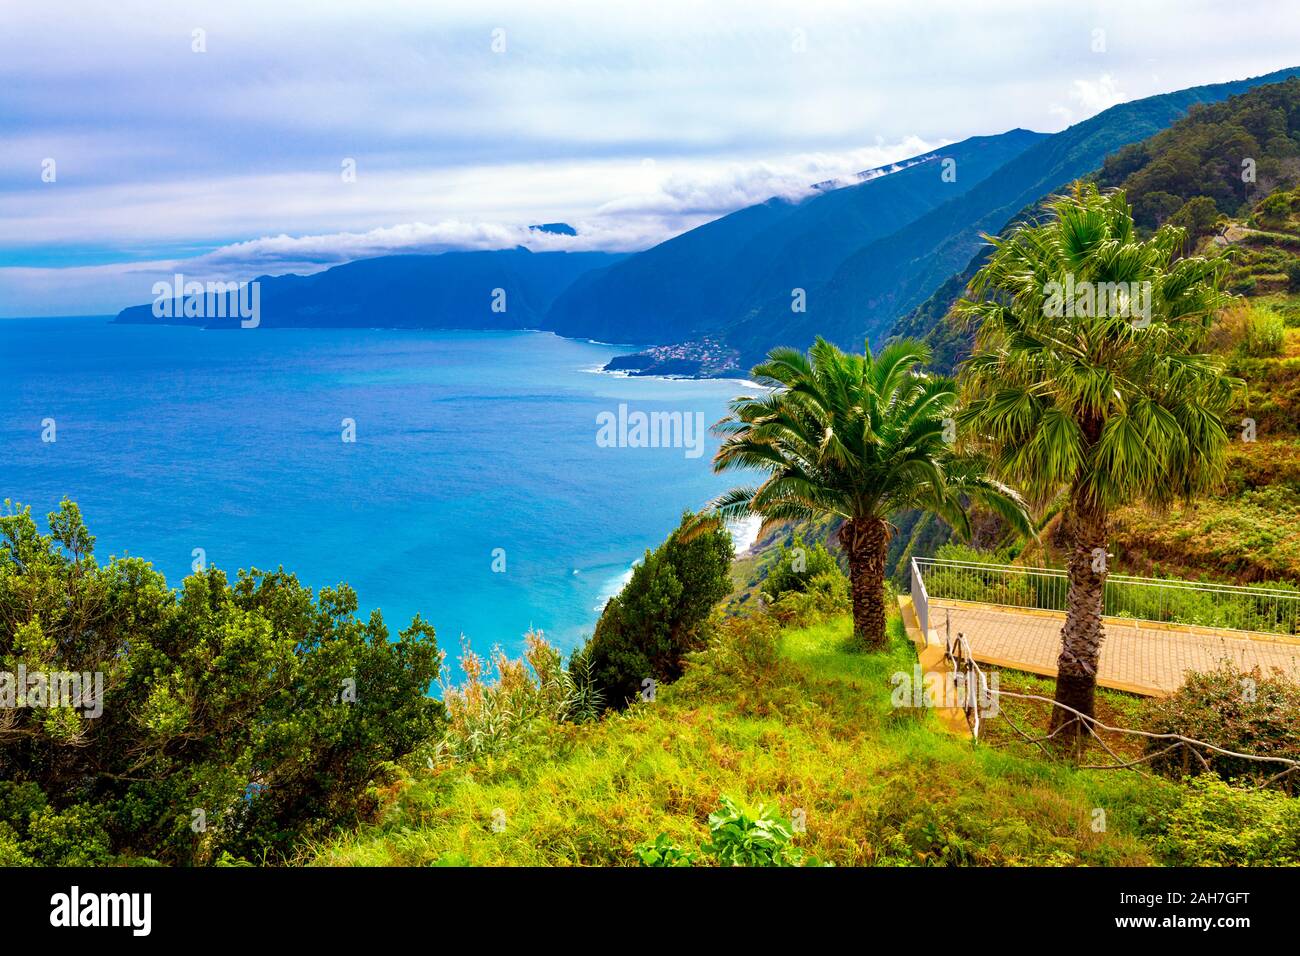 View of the coastline and palm trees in Madeira, Portugal Stock Photo